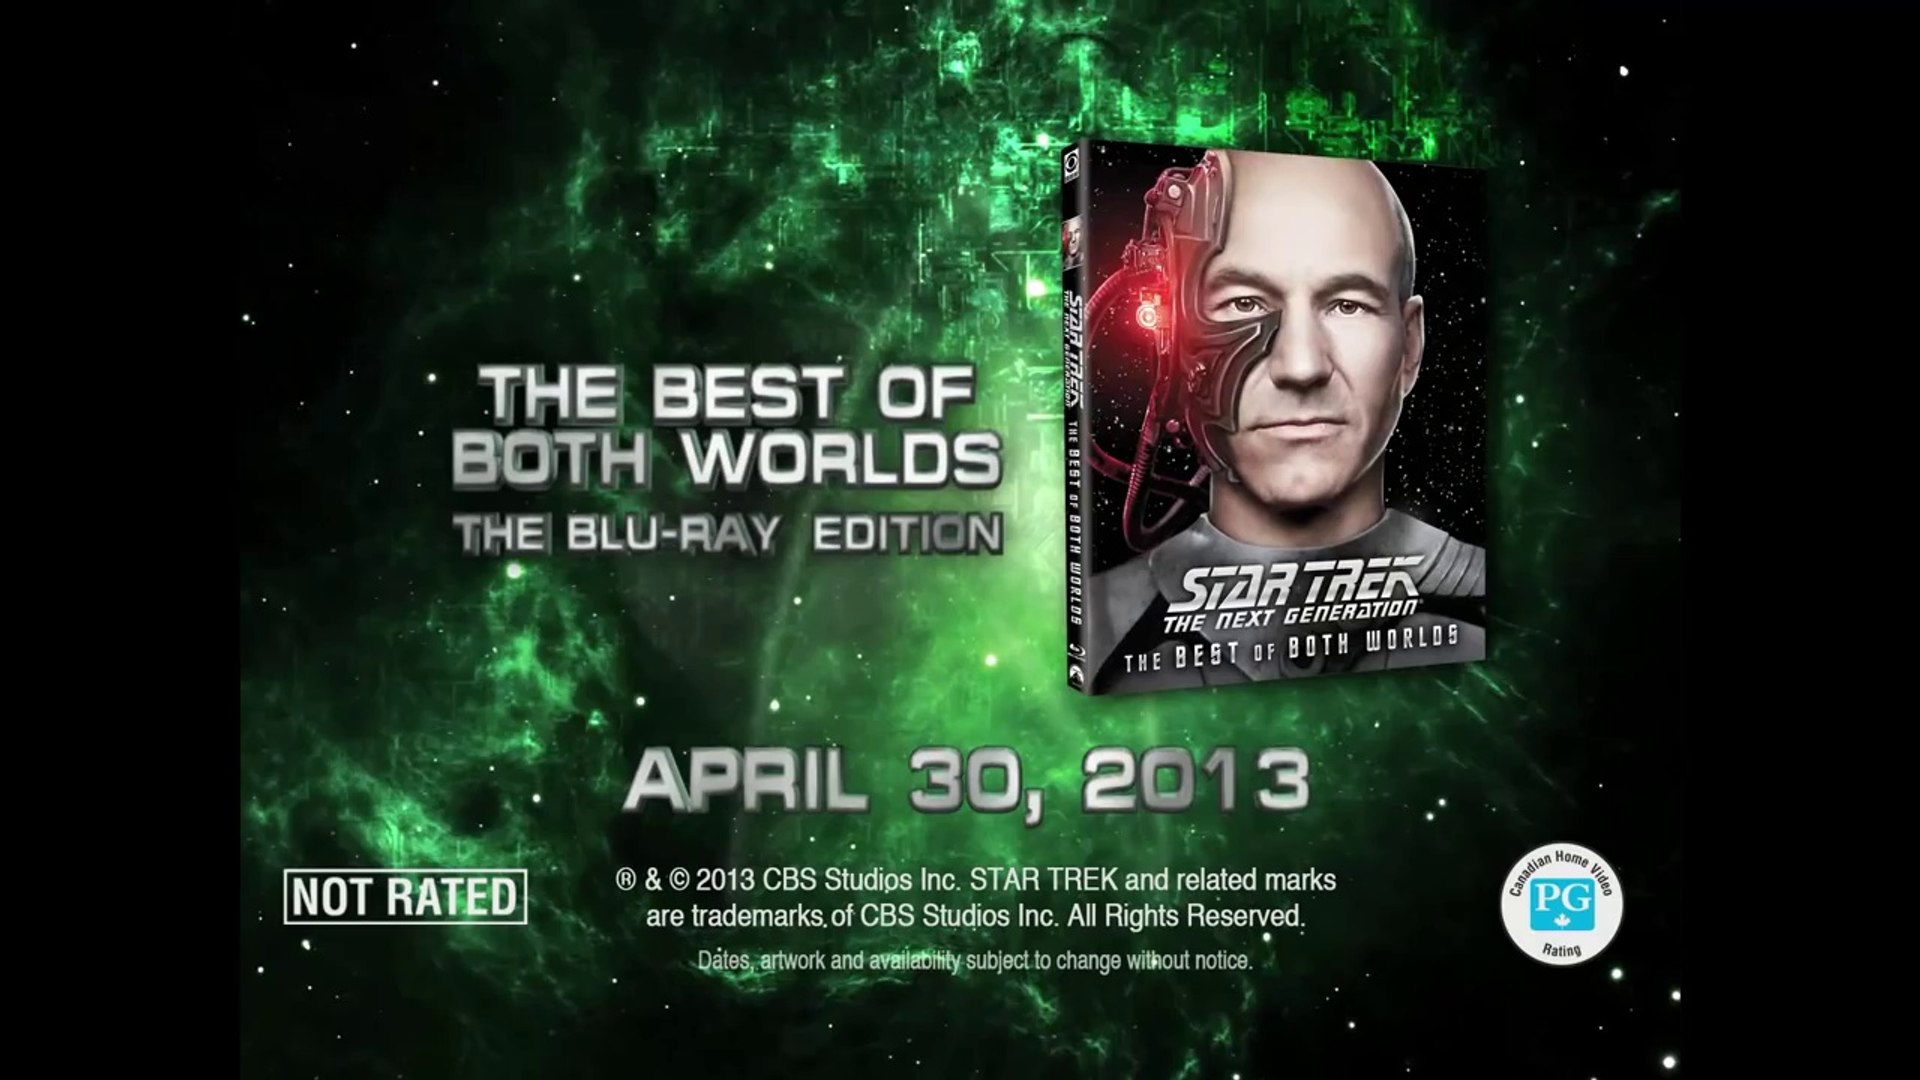 Star Trek The Next Generation The Best Of Both Worlds Blu Ray Trailer Hd Video Dailymotion